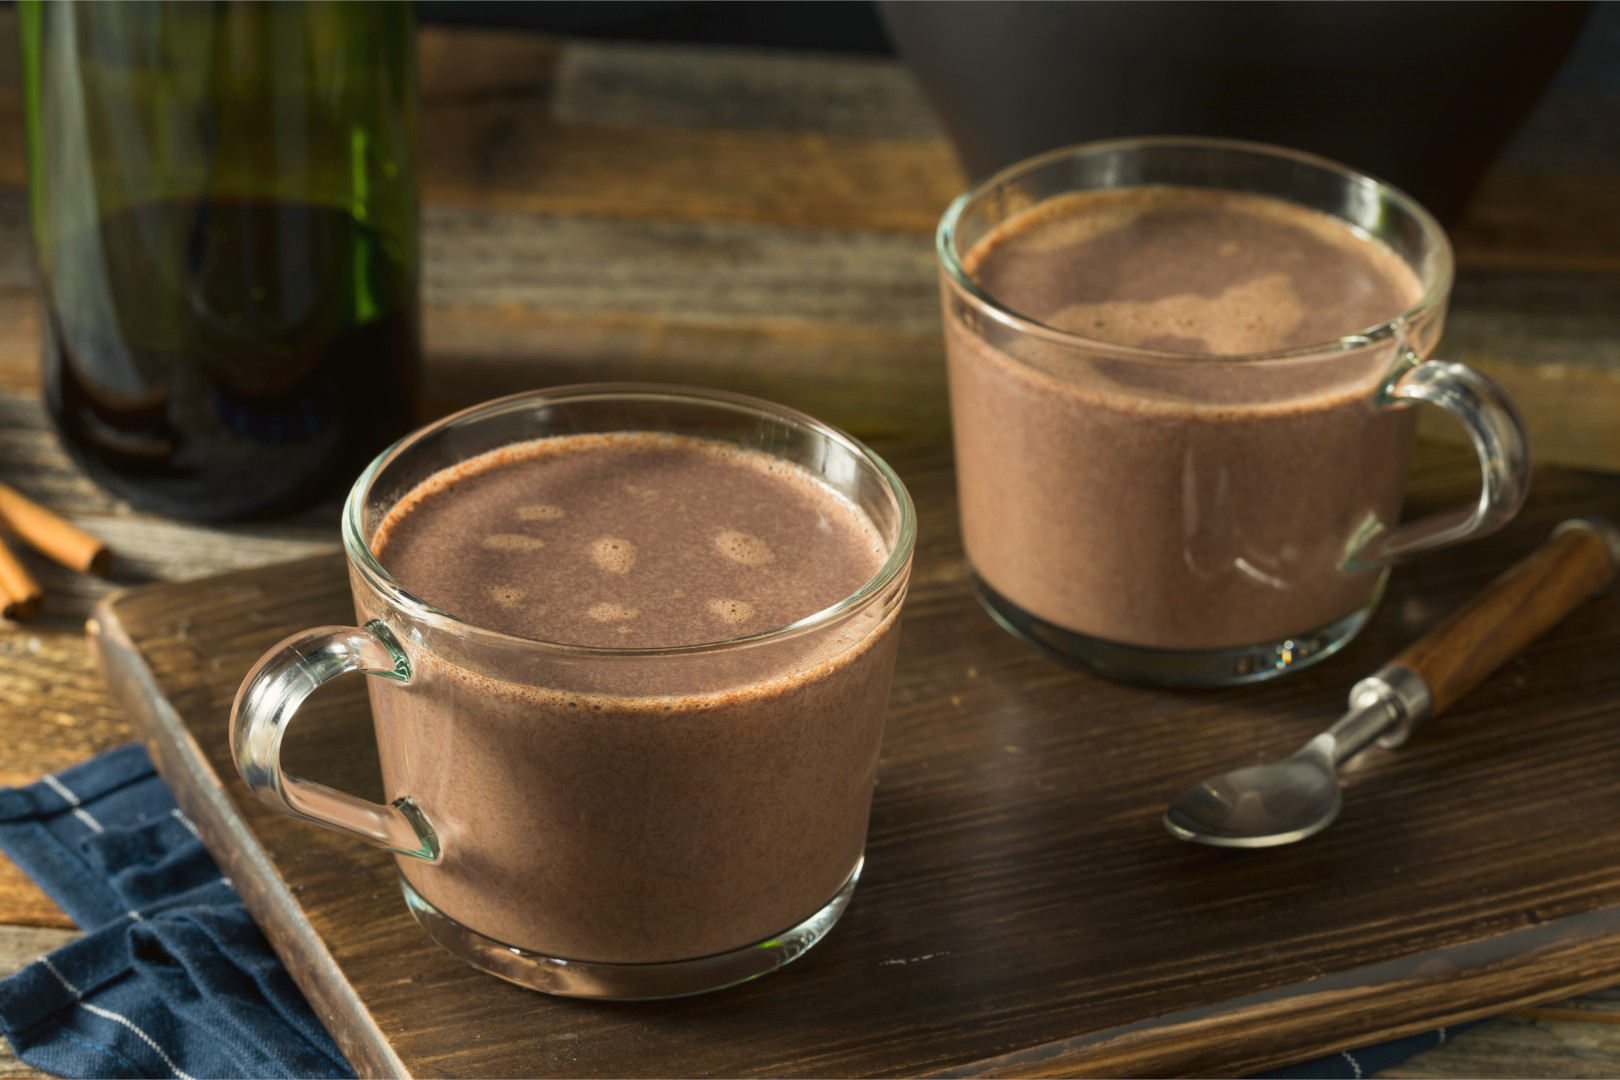 Two glass mugs of hot chocolate sitting on a wooden board